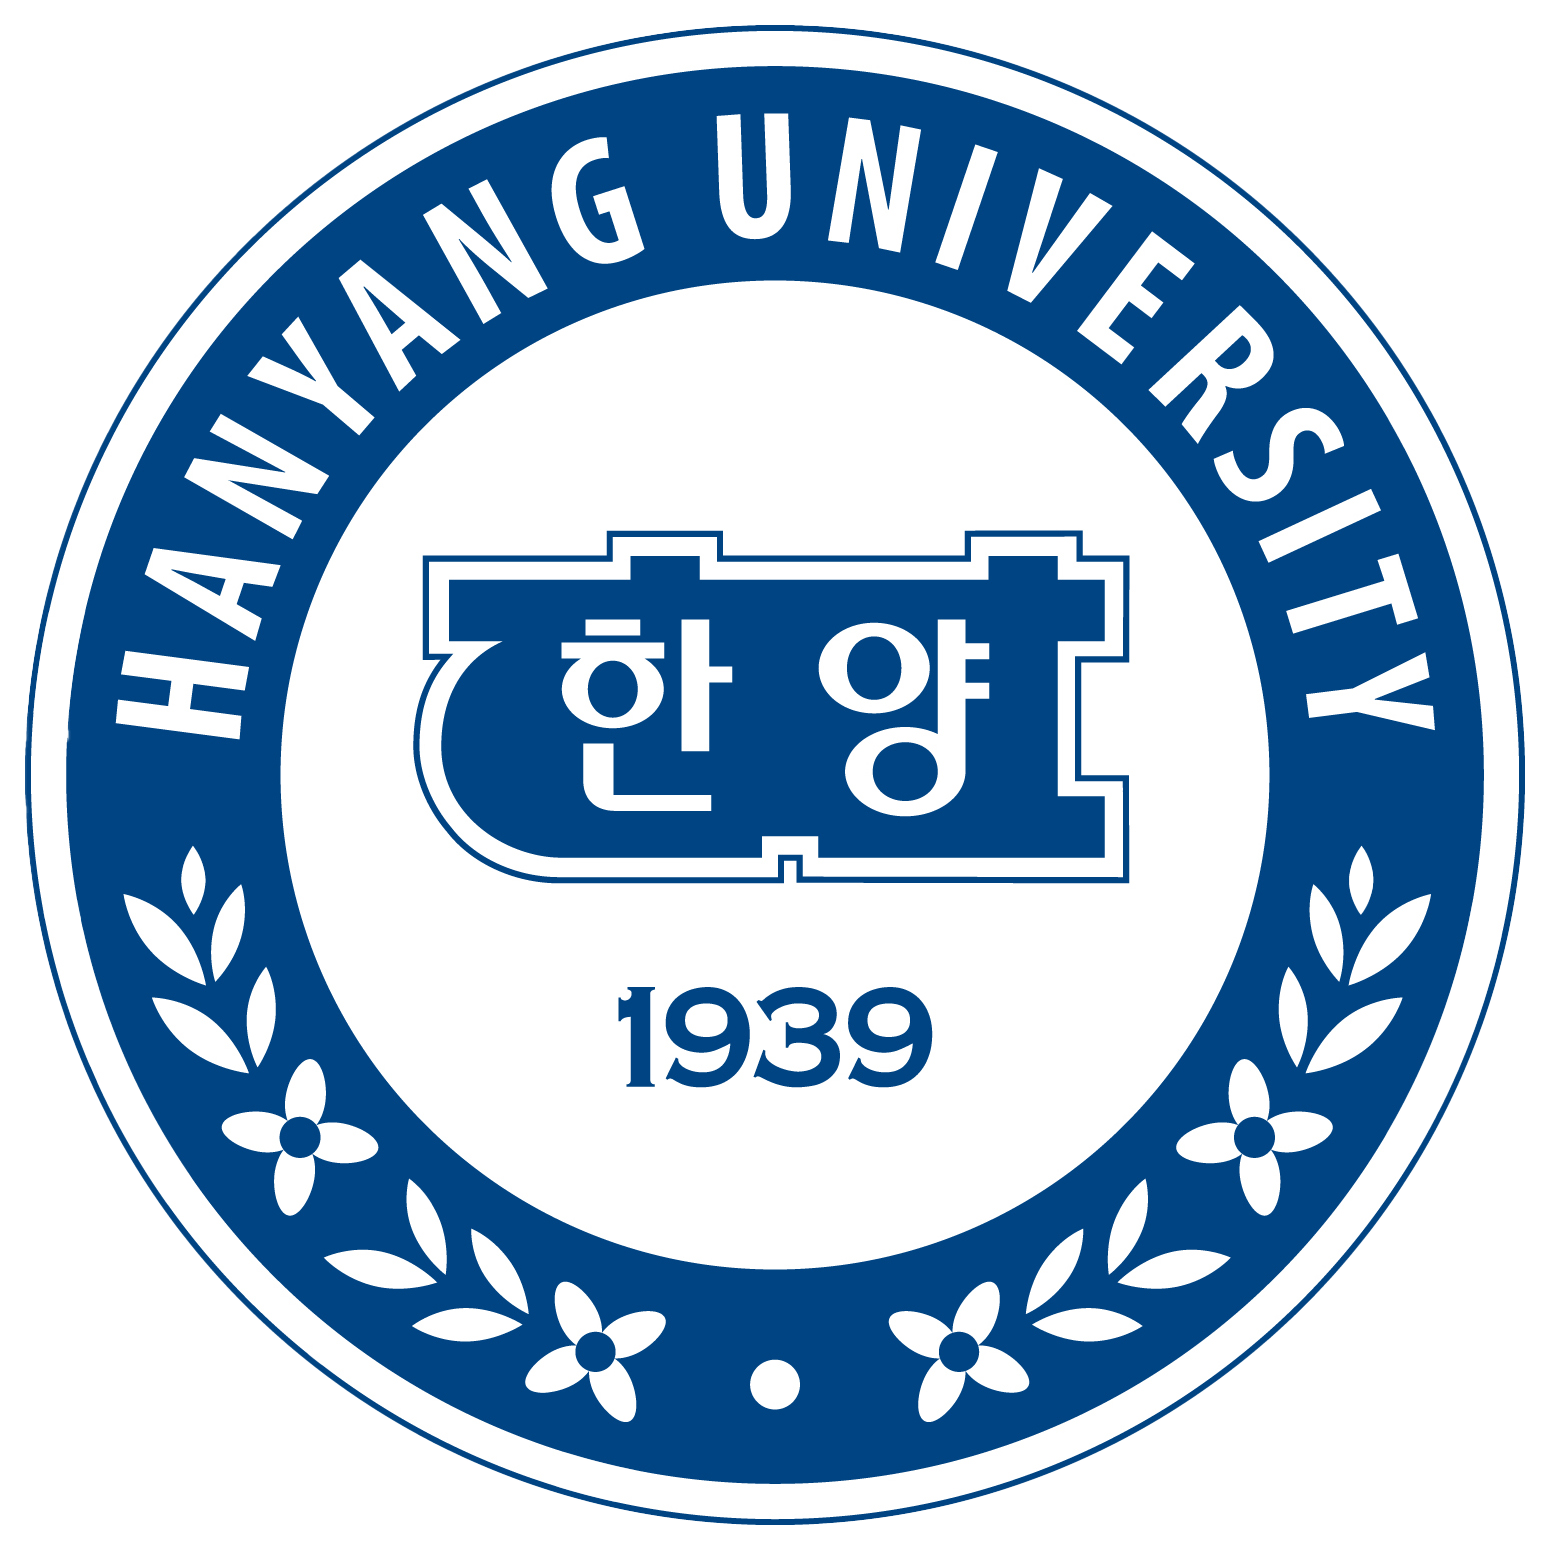 Hanyang University Foreign Student Admission Unit Eligibility Schedule_English Version 한양대 외국인전형 모집단위 지원자격 전형일정_한글본_00.png